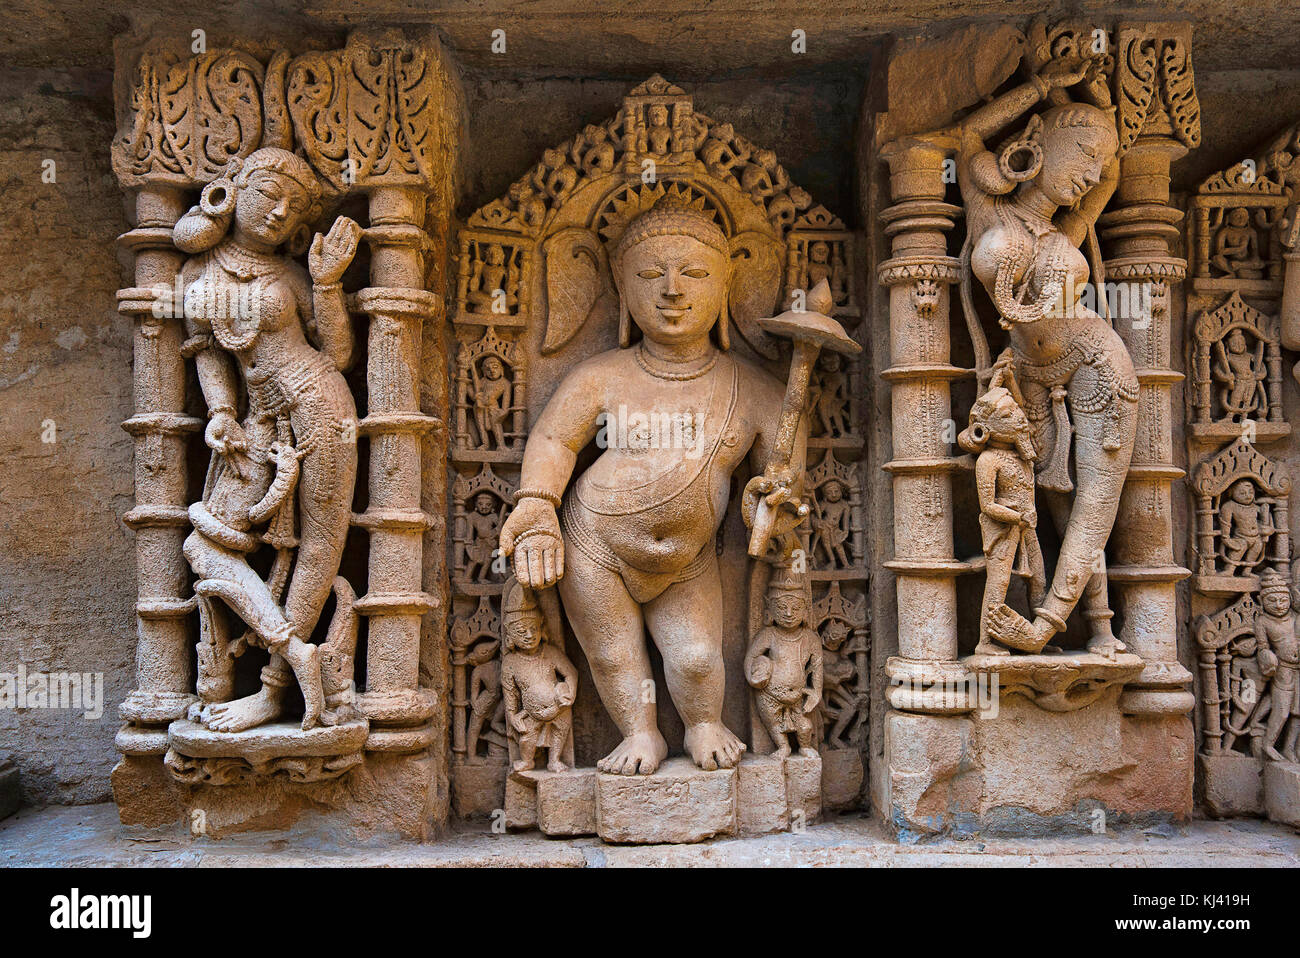 Carved idol of Lord Vamana on the inner wall of Rani ki vav, an intricately constructed step well. Patan in Gujarat, India. Stock Photo